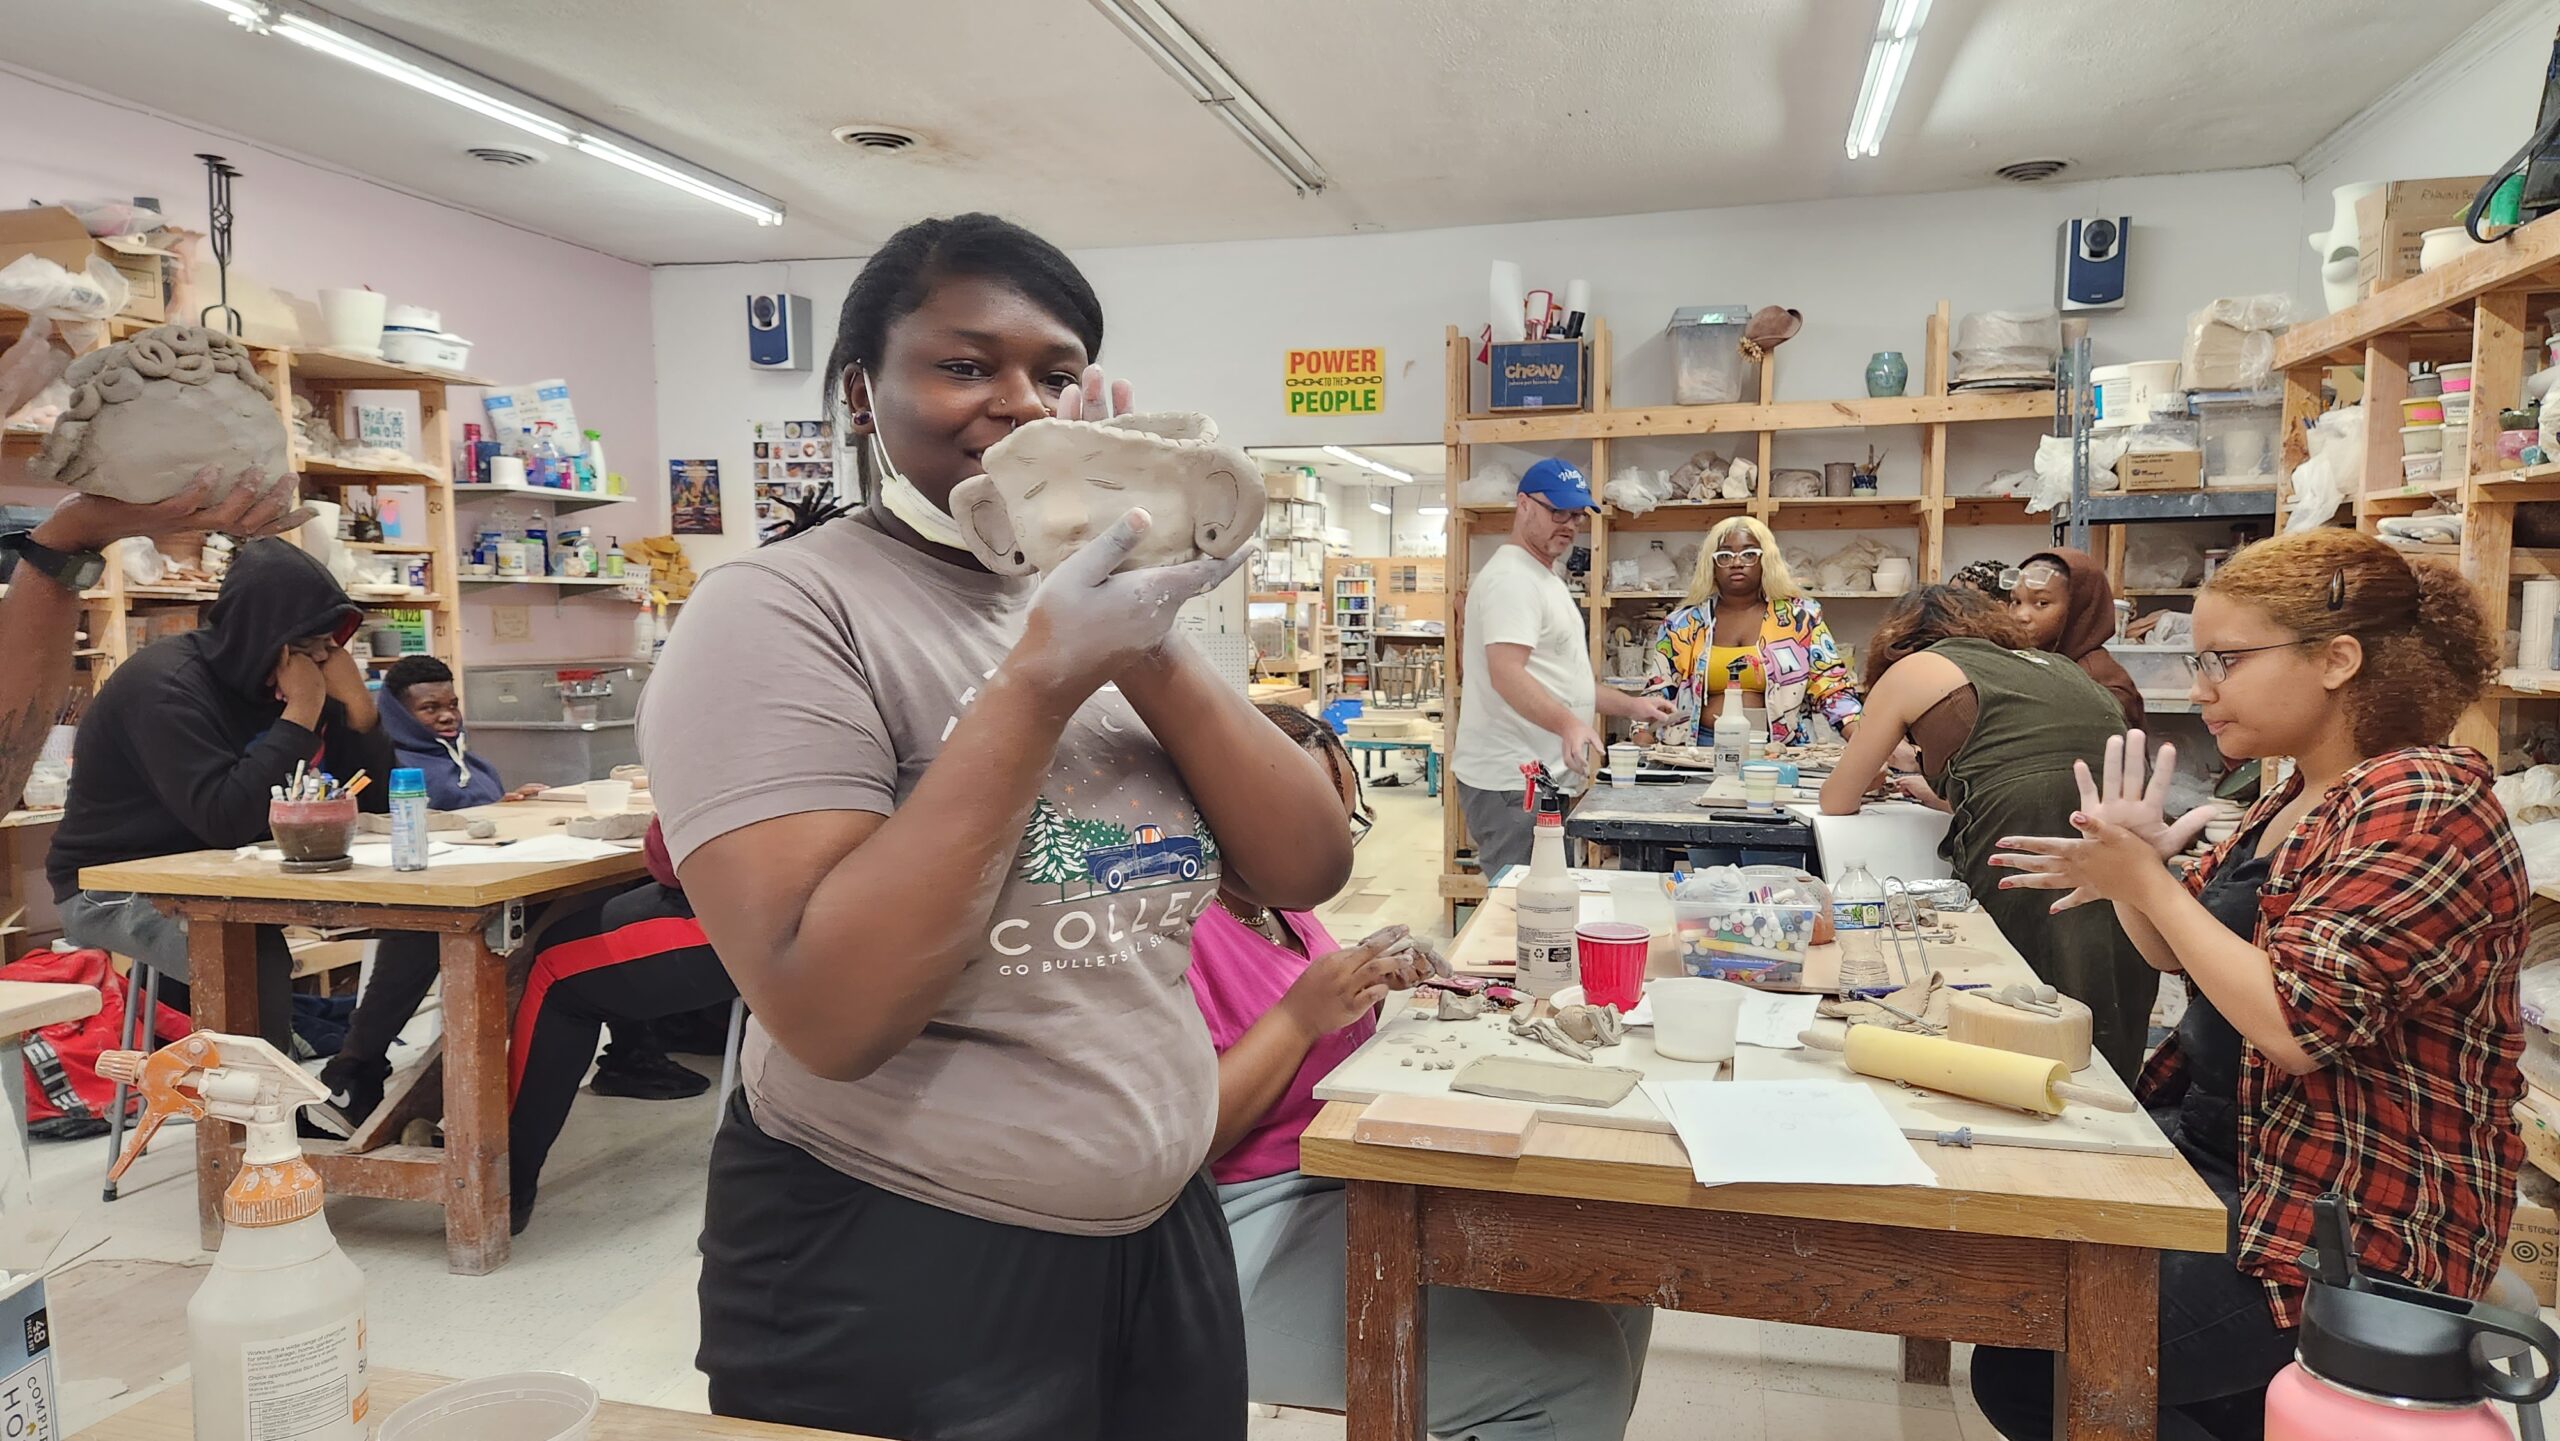 A young artist stand in a ceramics studio holding a work in progress. Other students are working at a long table behind her.